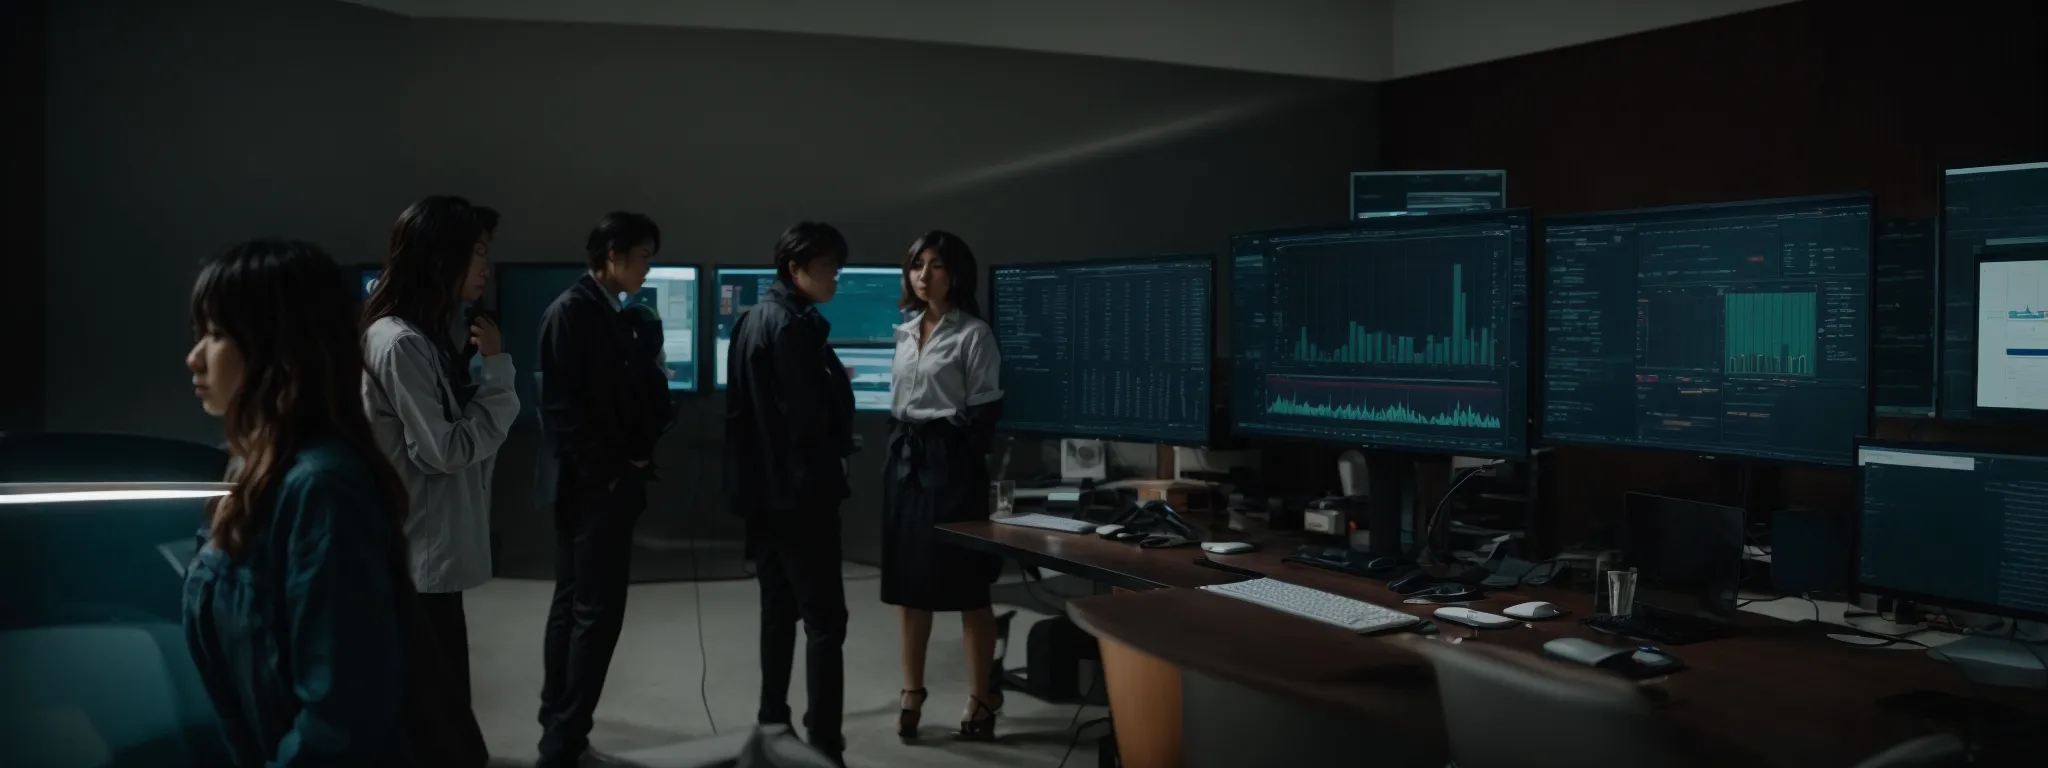 a team of professionals gathered around a large computer monitor analyzing a dynamic digital analytics dashboard.